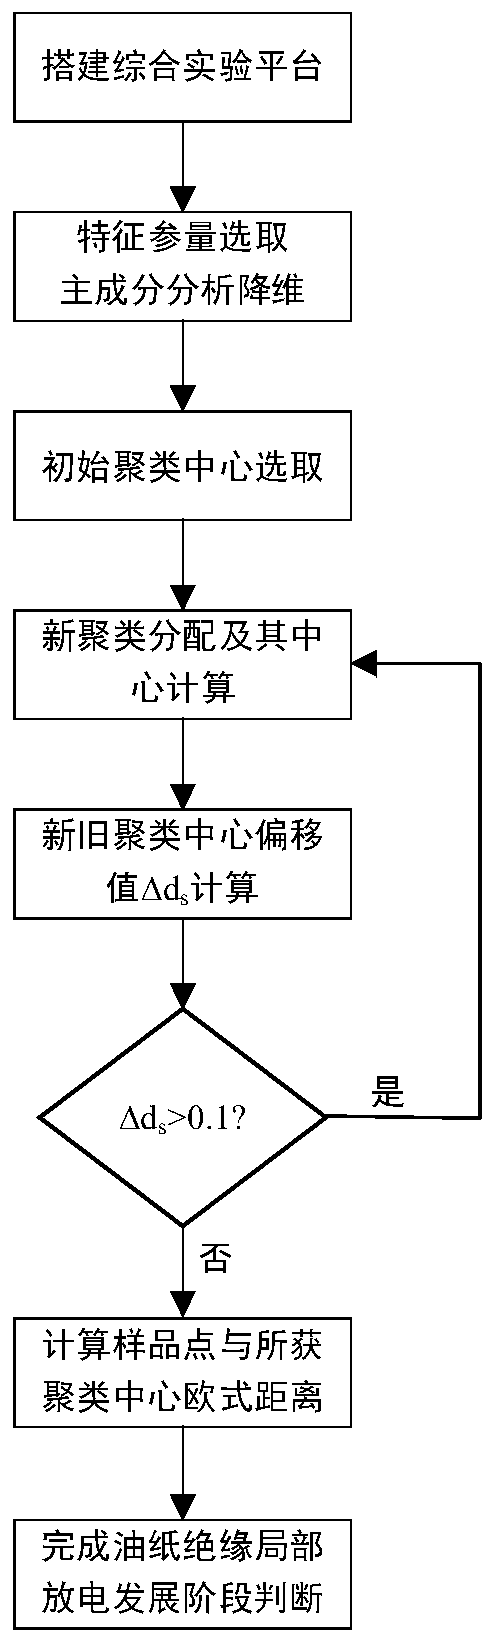 Judgment method for partial discharge development stage of oil-paper insulation